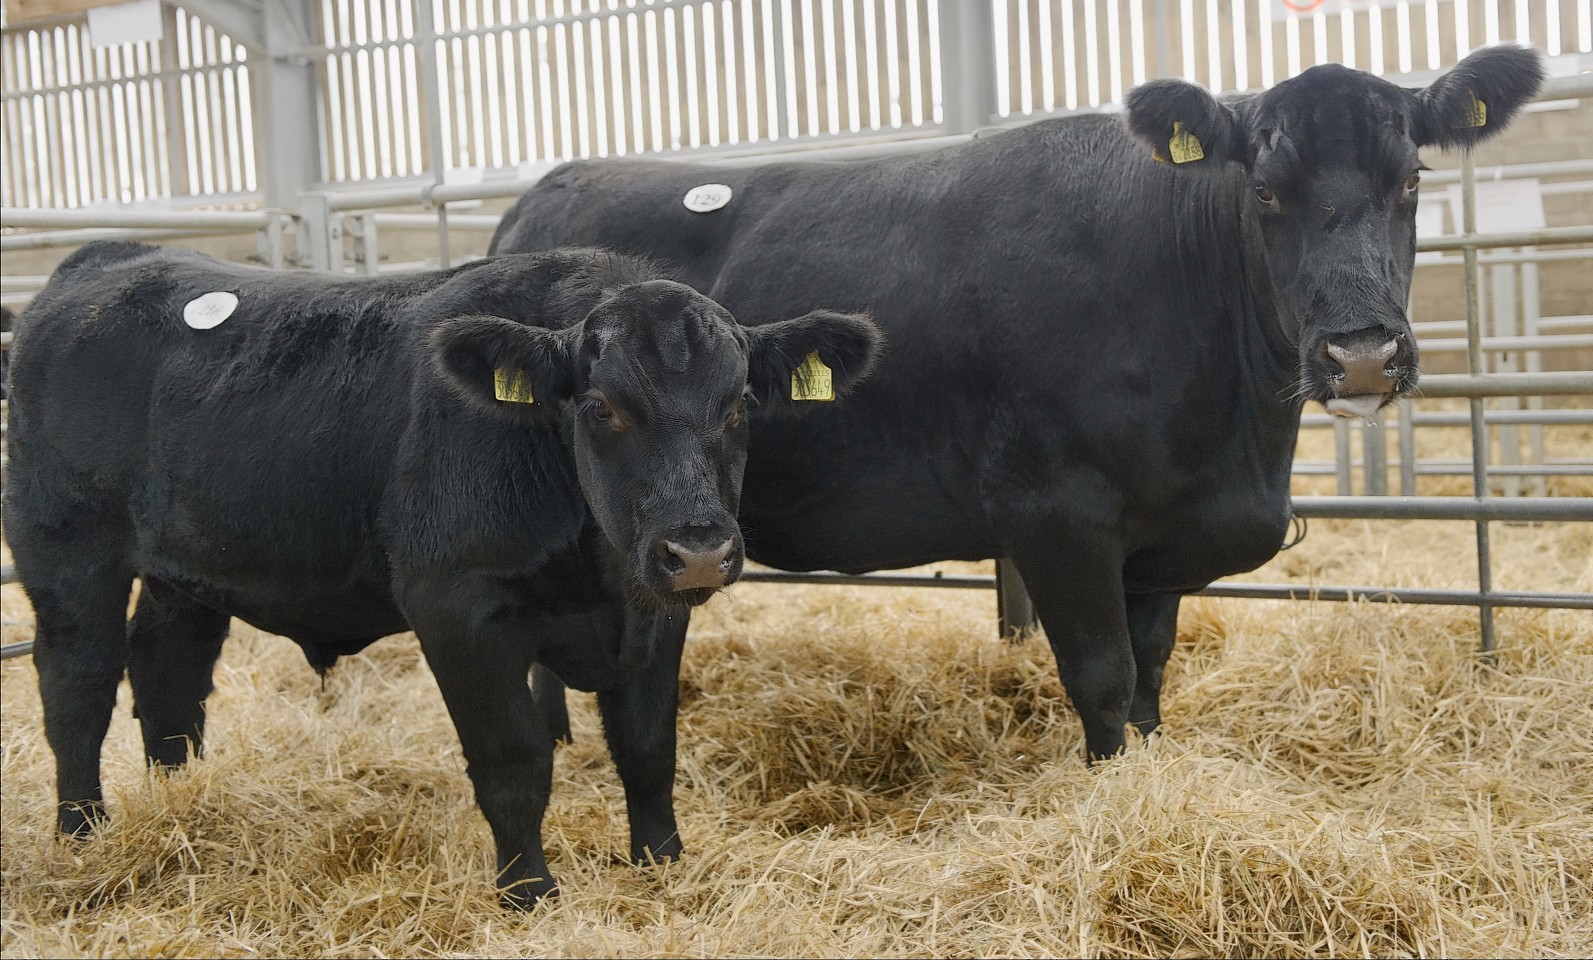 The 35,000gn Blelack cow and her calf which sold for 10,000gn